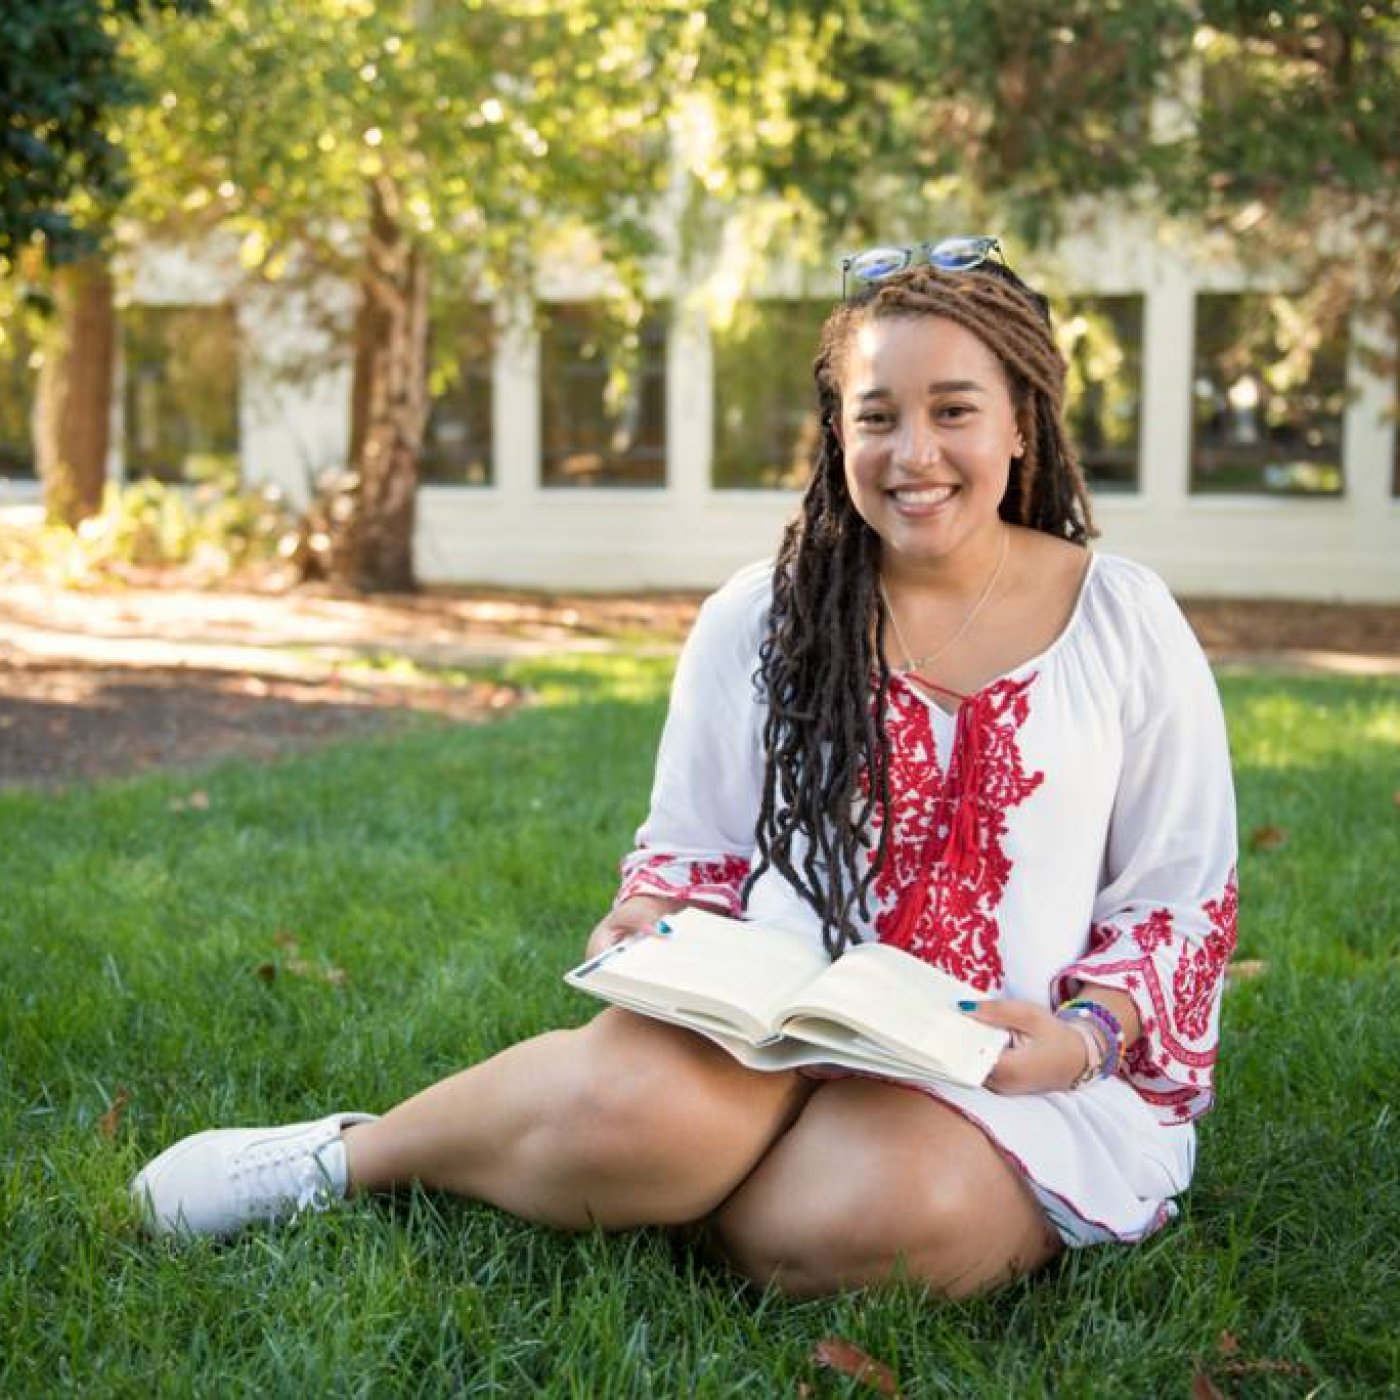 Student sitting on grass with book open